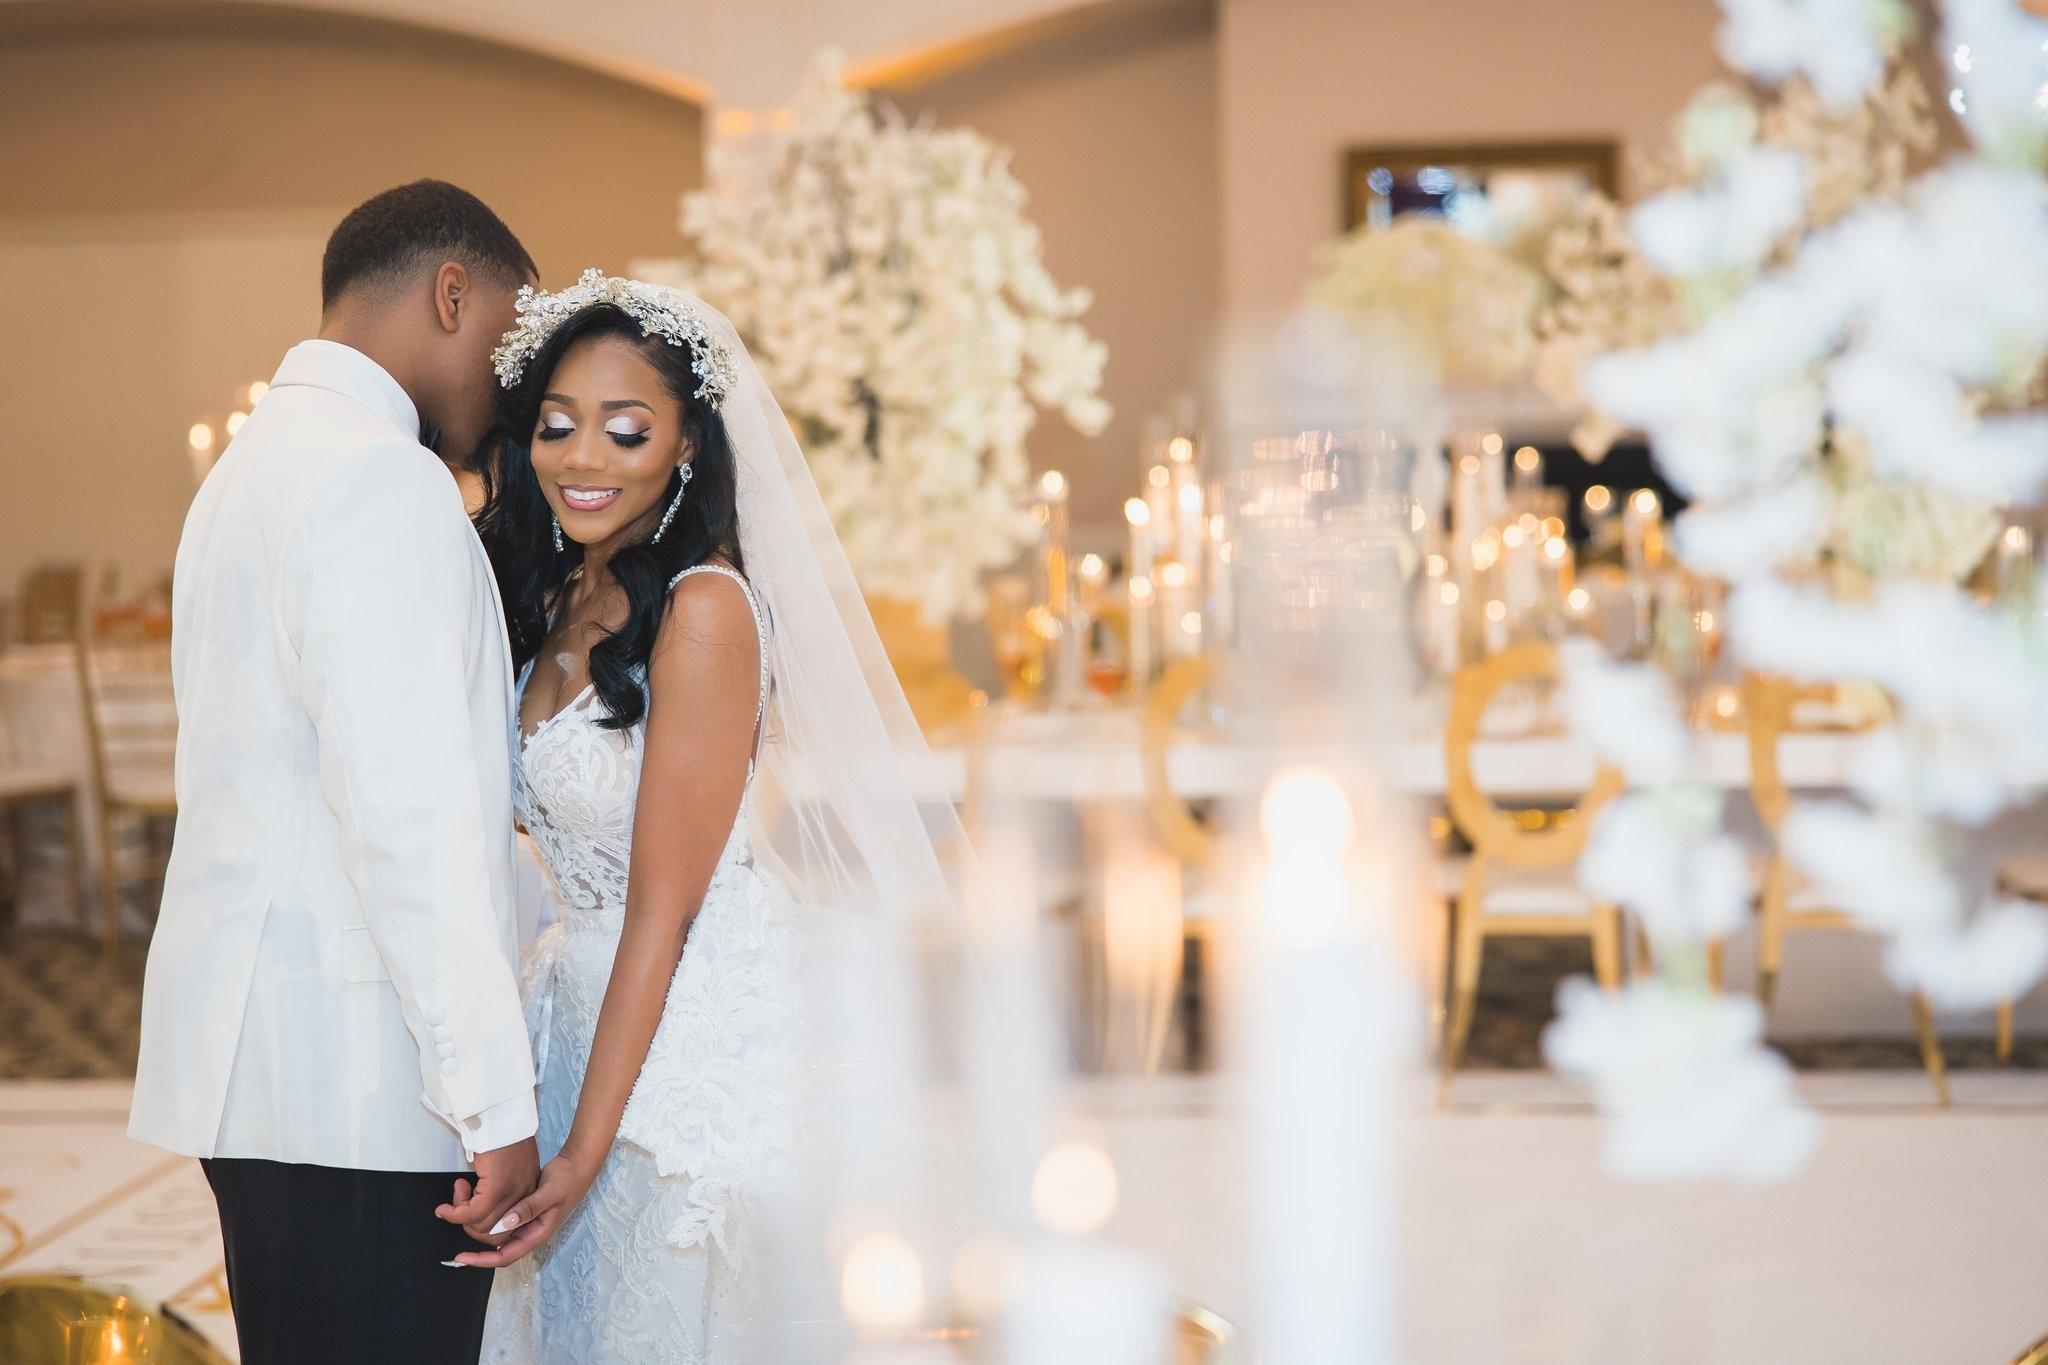 How to Choose a Wedding Photographer in Washington D.C.